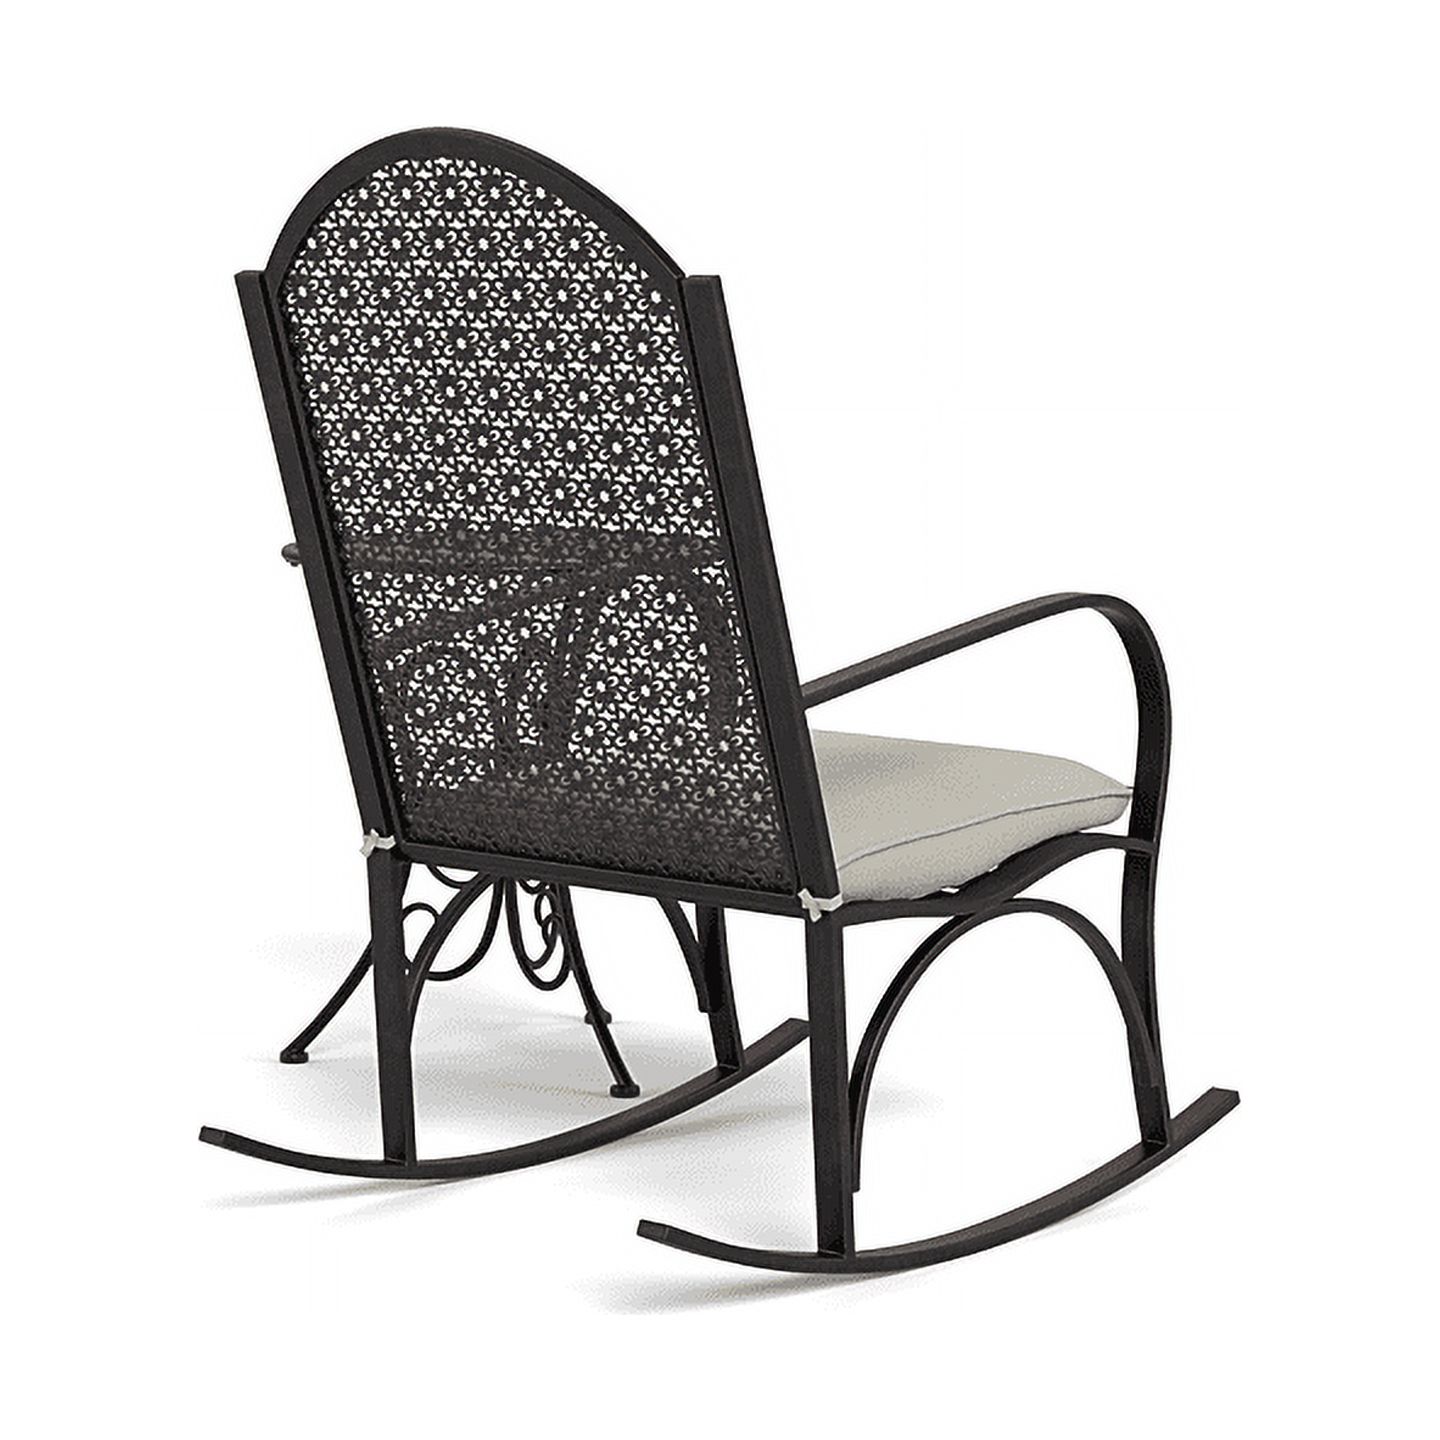 Tortuga Outdoor Garden Rocking Chair with Side Table - Oiled Copper Finish, Beige Cushion - image 4 of 11